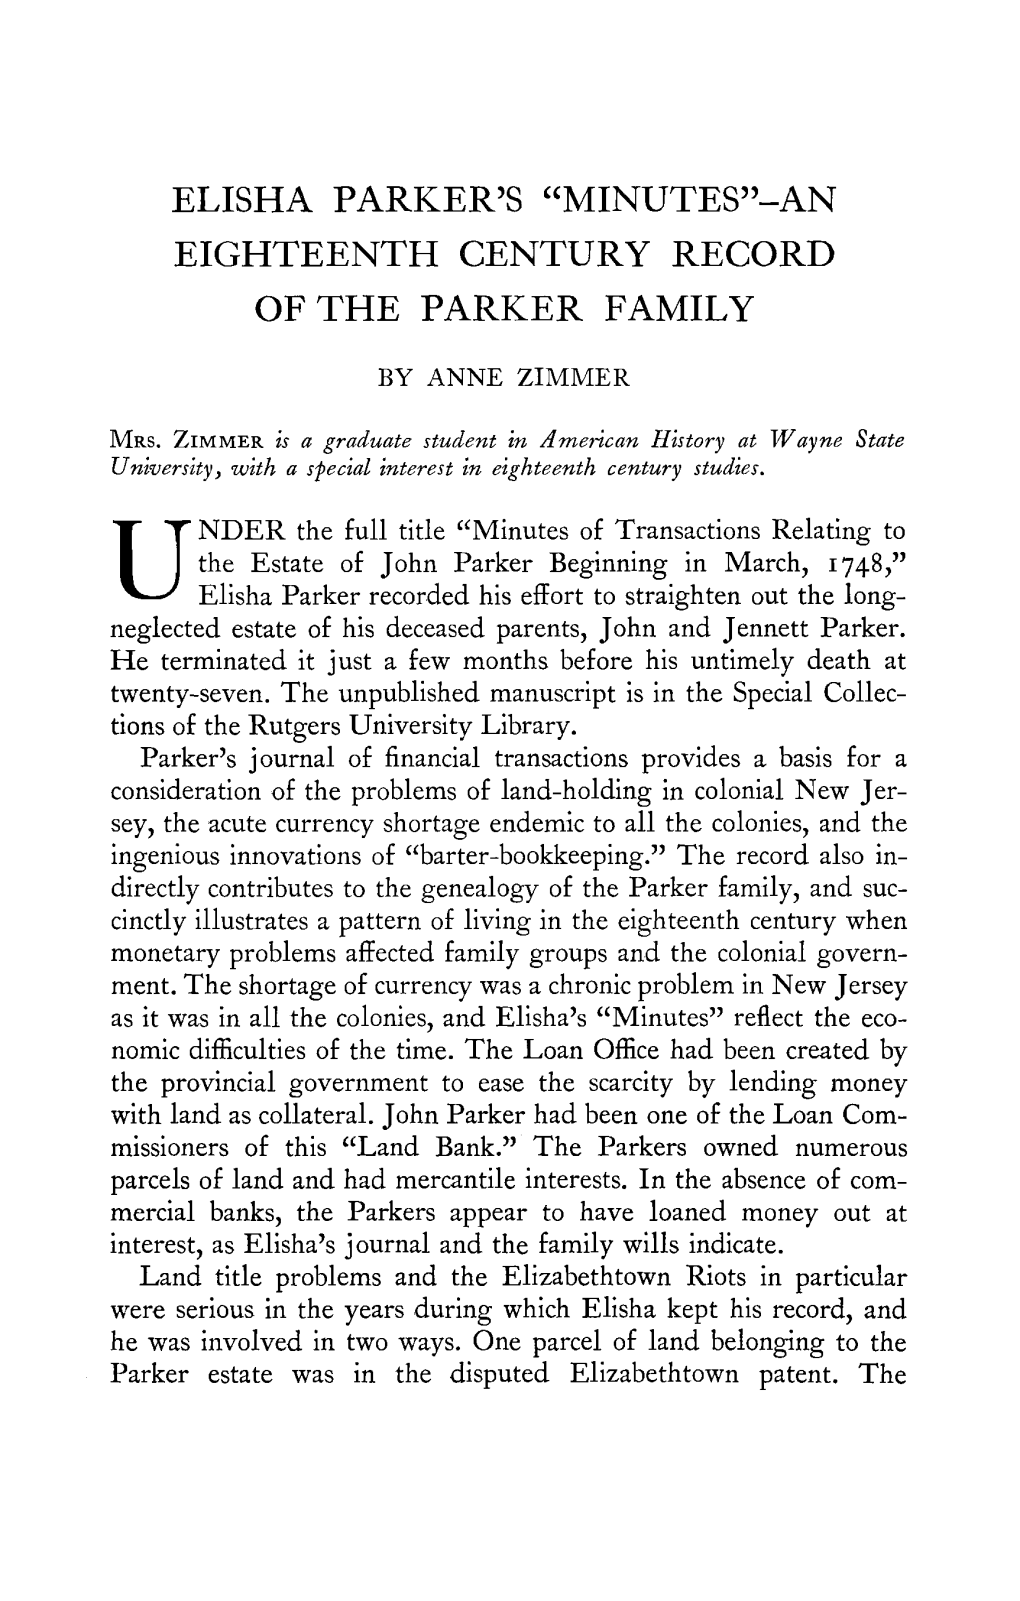 Elisha Parker's "Minutes"-An Eighteenth Century Record of the Parker Family